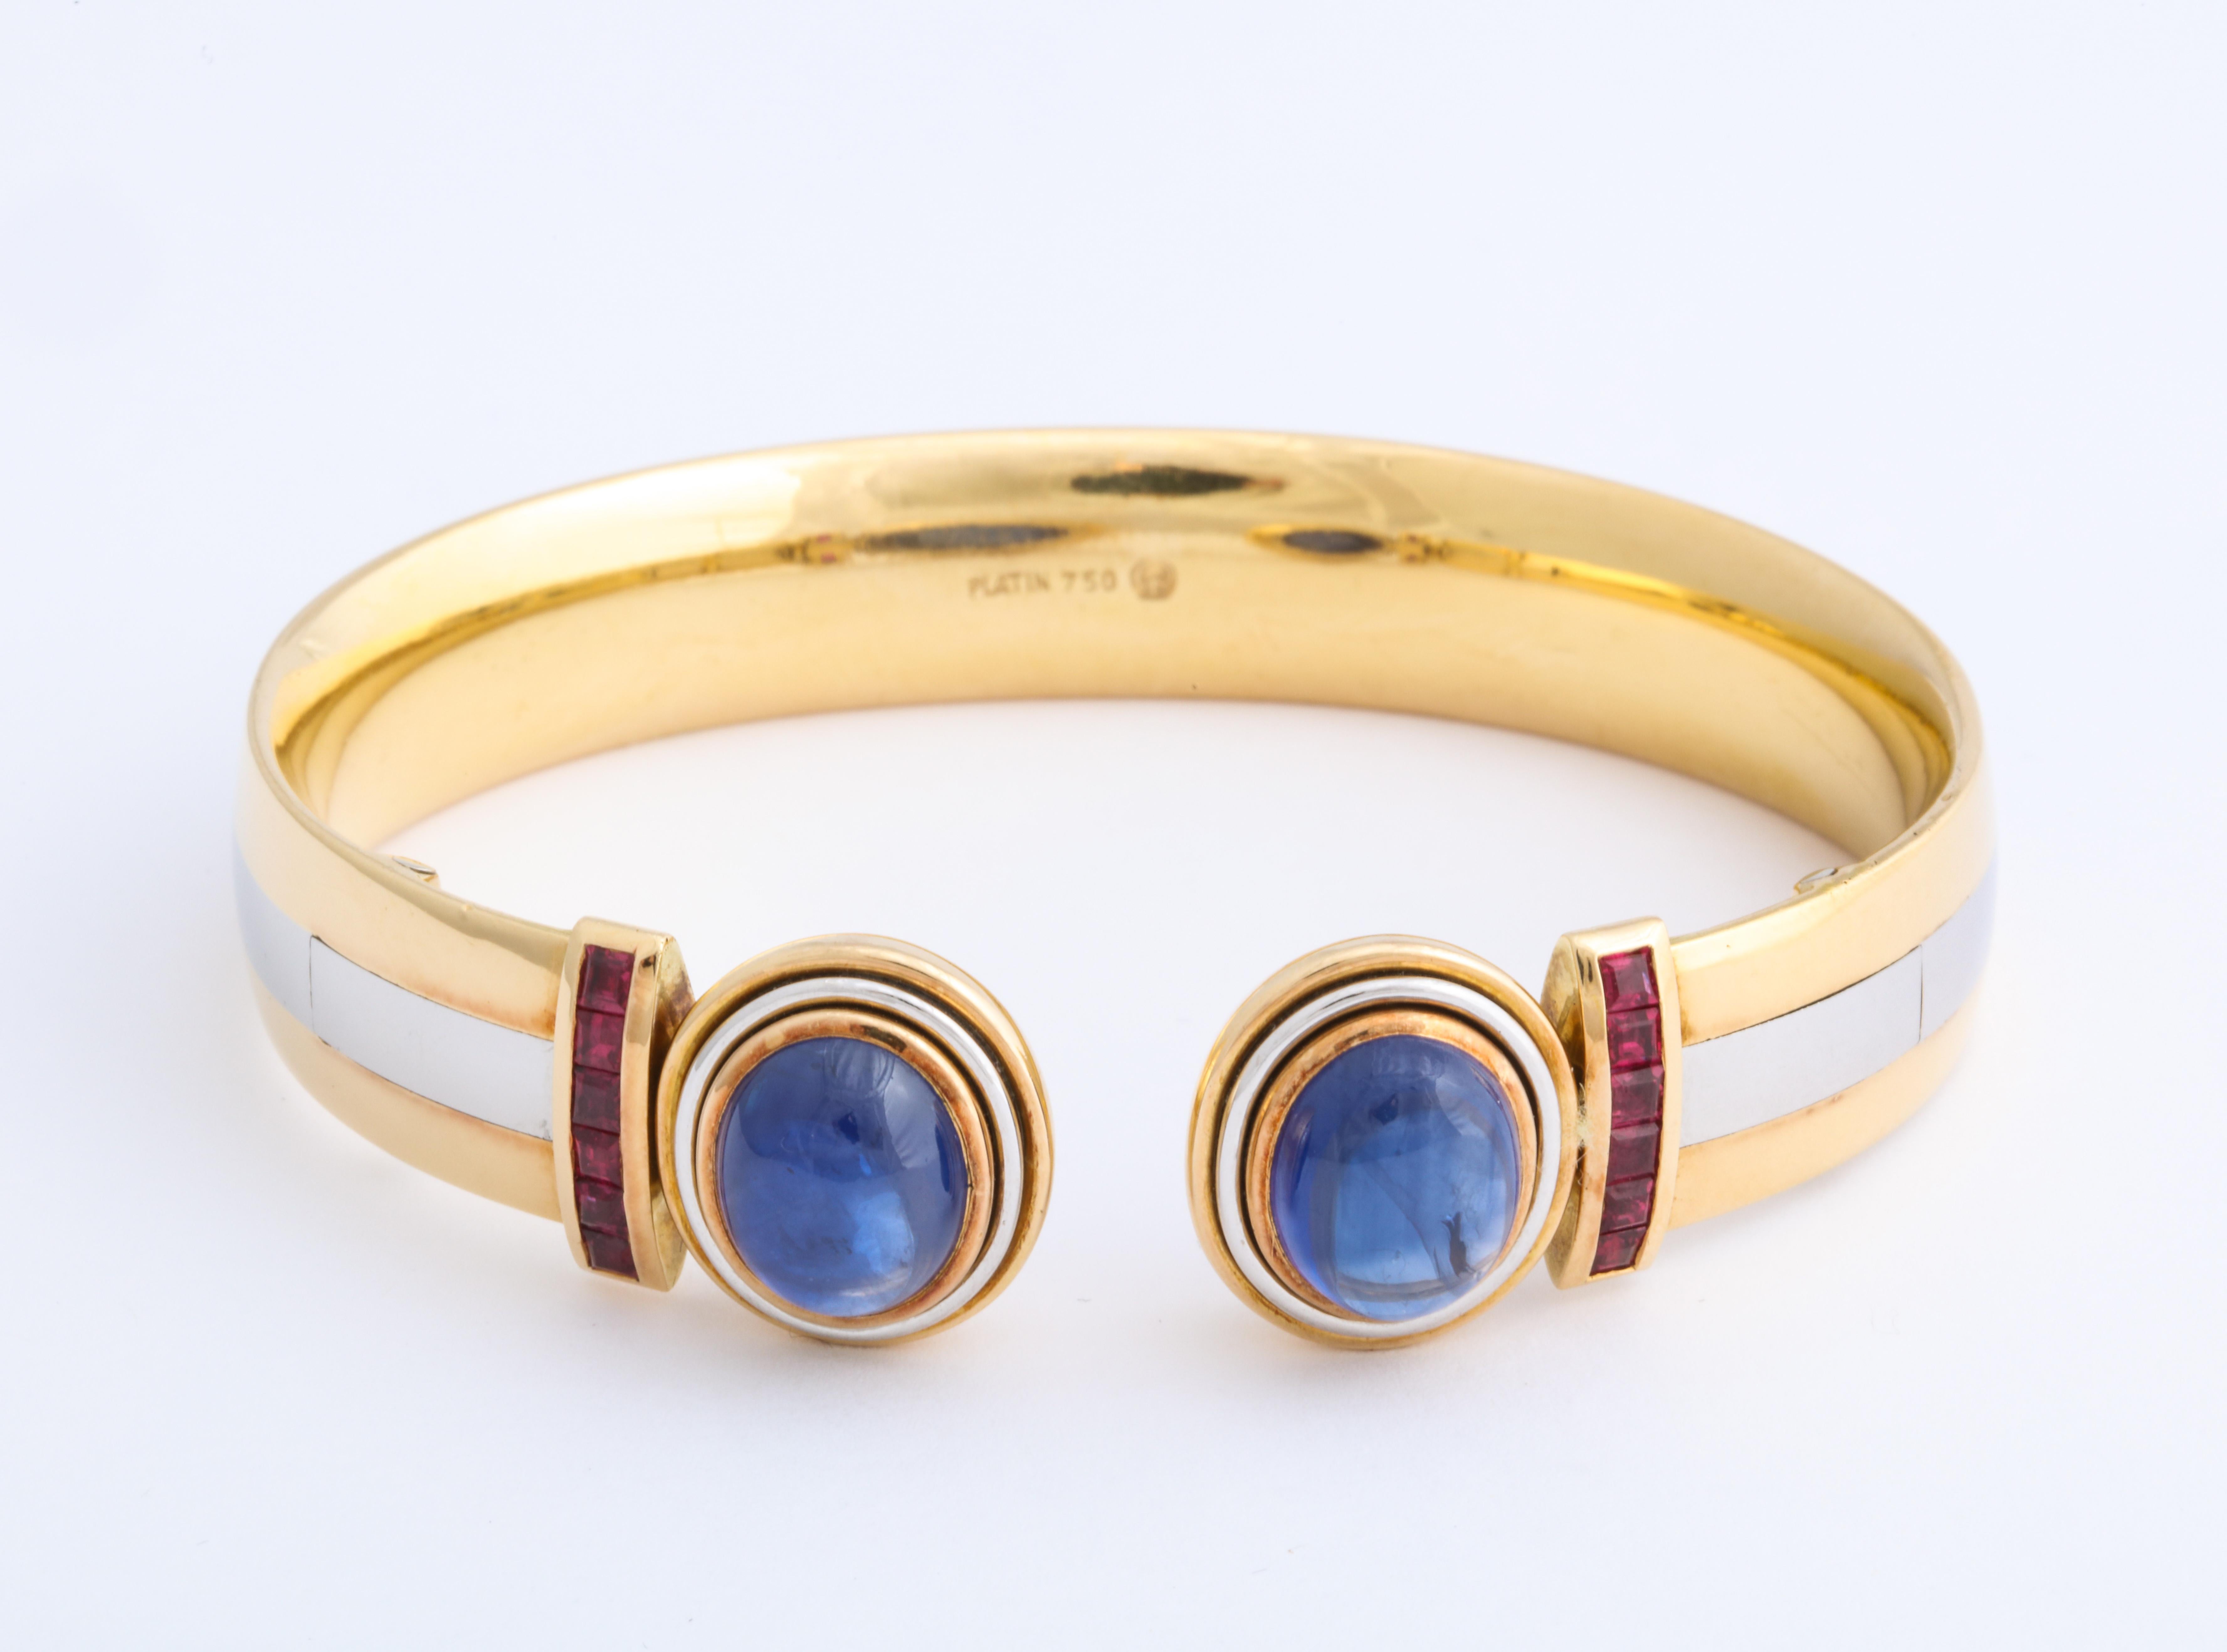 World-renowned Munich-based designer Stefan Hemmerle created this artful hinged bangle bracelet contrasting colors, shapes and textures for a modern statement in cabochon sapphire (2 = 12cts) accented by square-cut rubies in a platinum and 18KYG